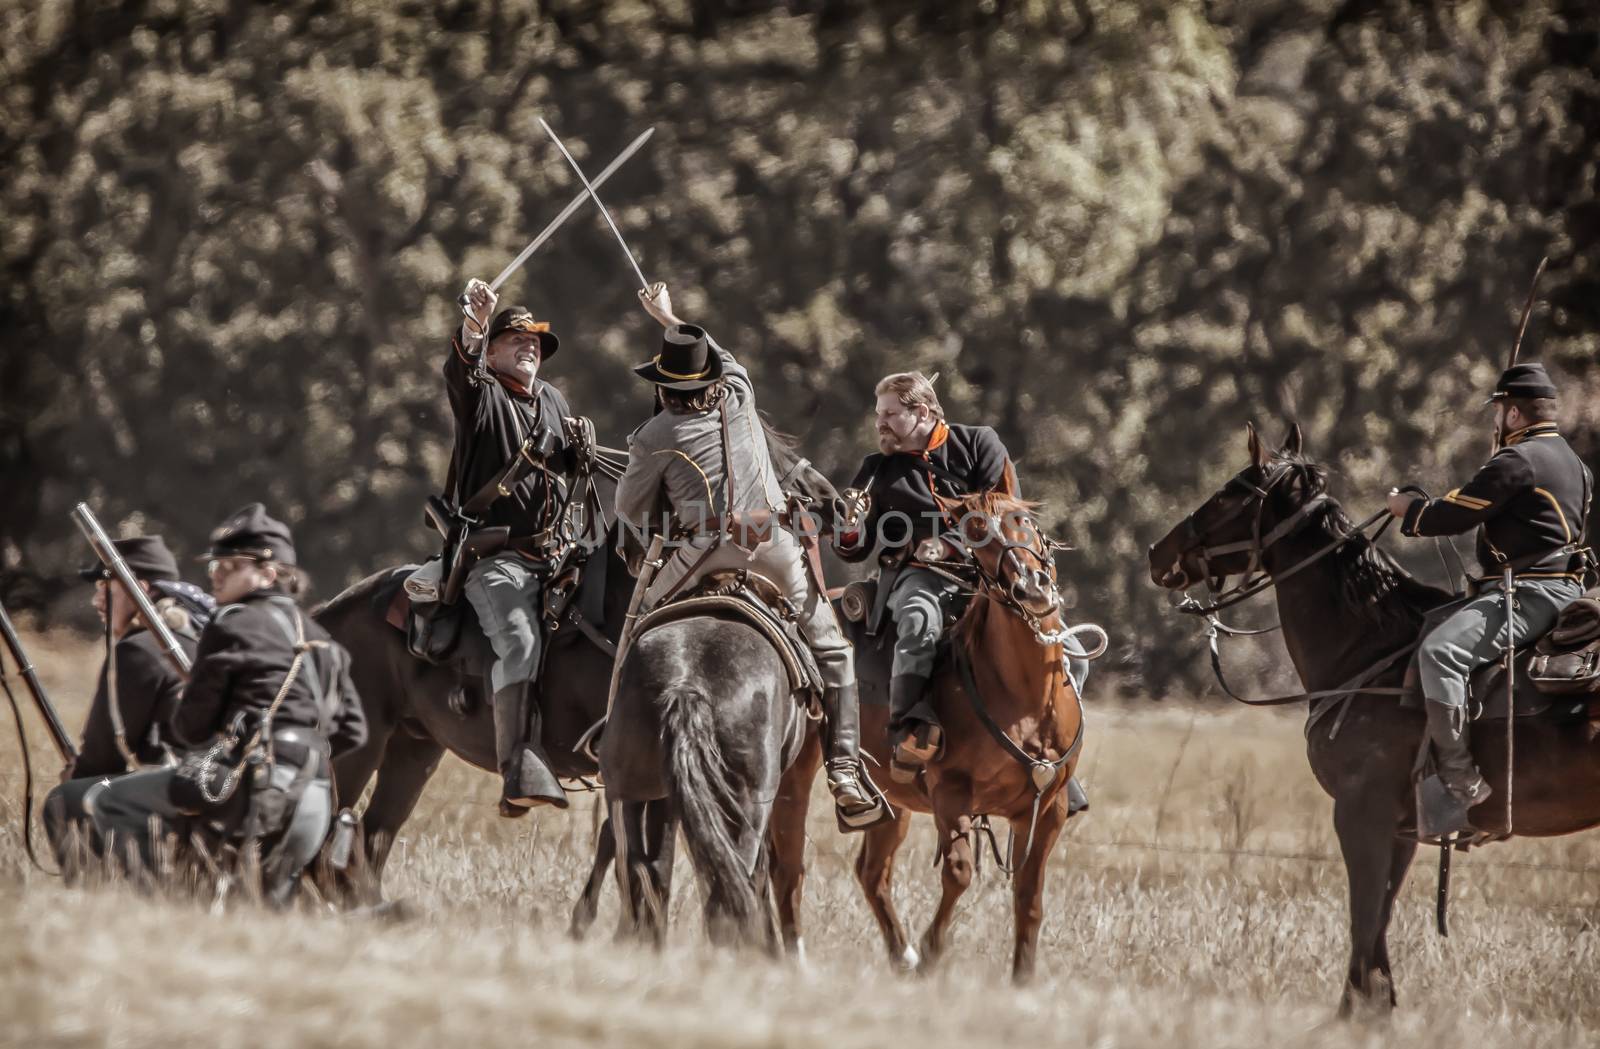 Northern Army scouts fight on horseback with the Confederates during Civil War Reenactment at Anderson, California.
Photo taken on: September 27th, 2014